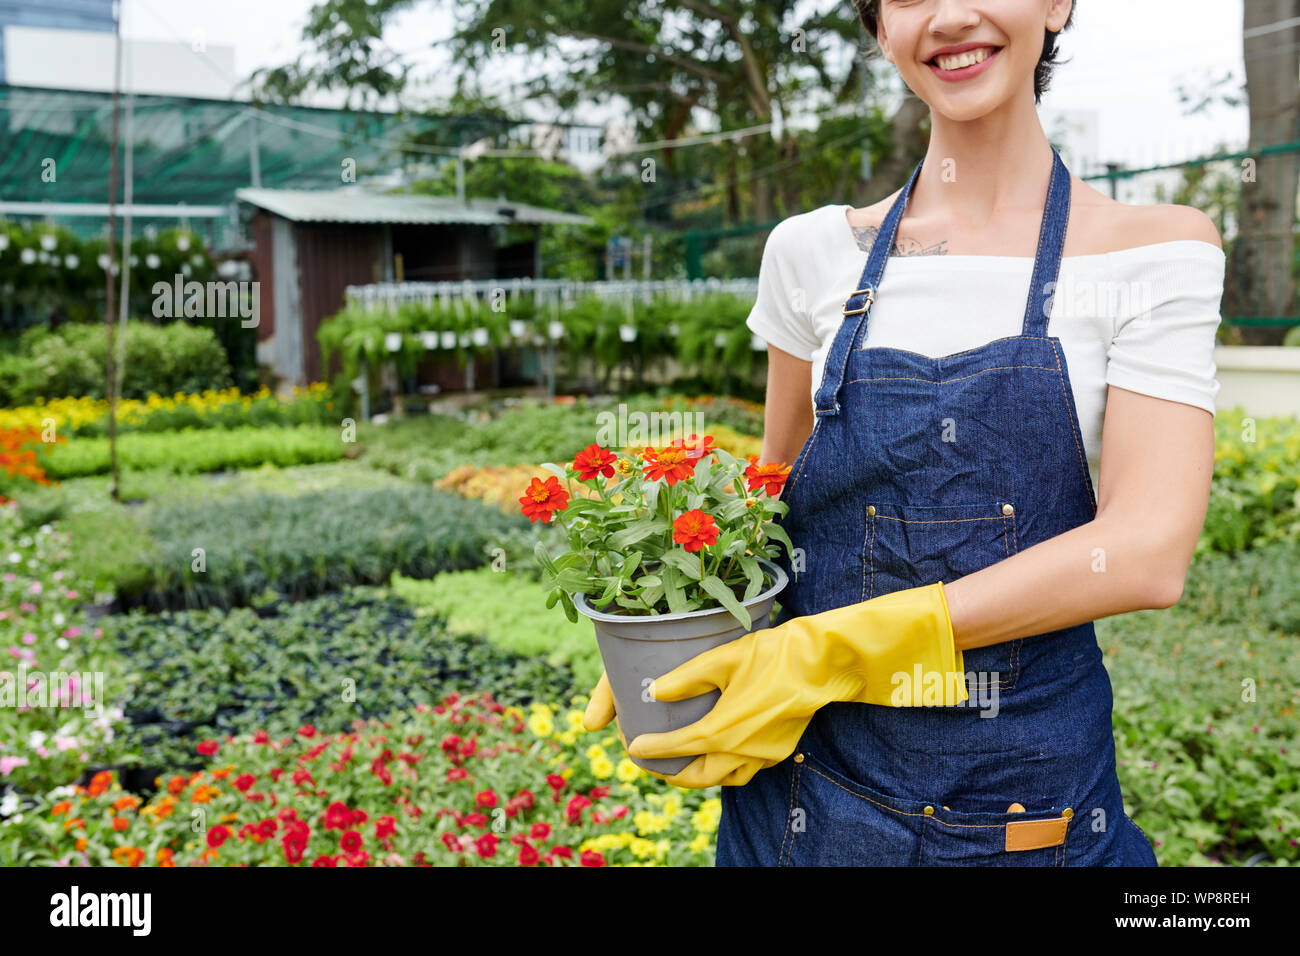 Cropped Image Of Female Florist With Beautiful Toothy Smile